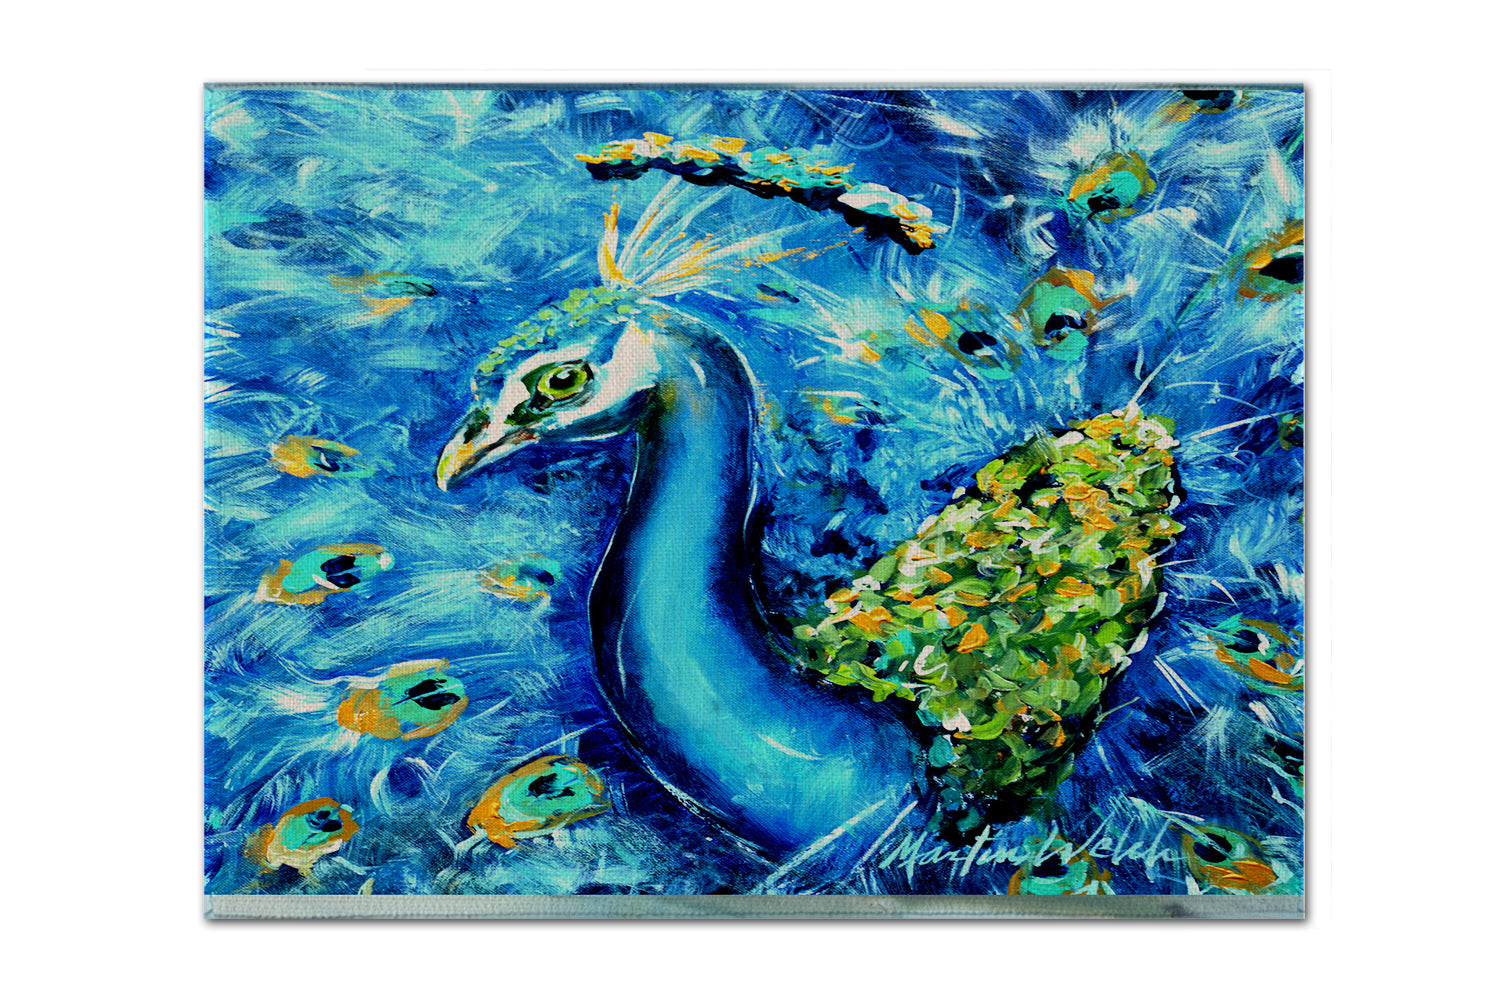 Buy this Peacock Straight Up in Blue Fabric Placemat